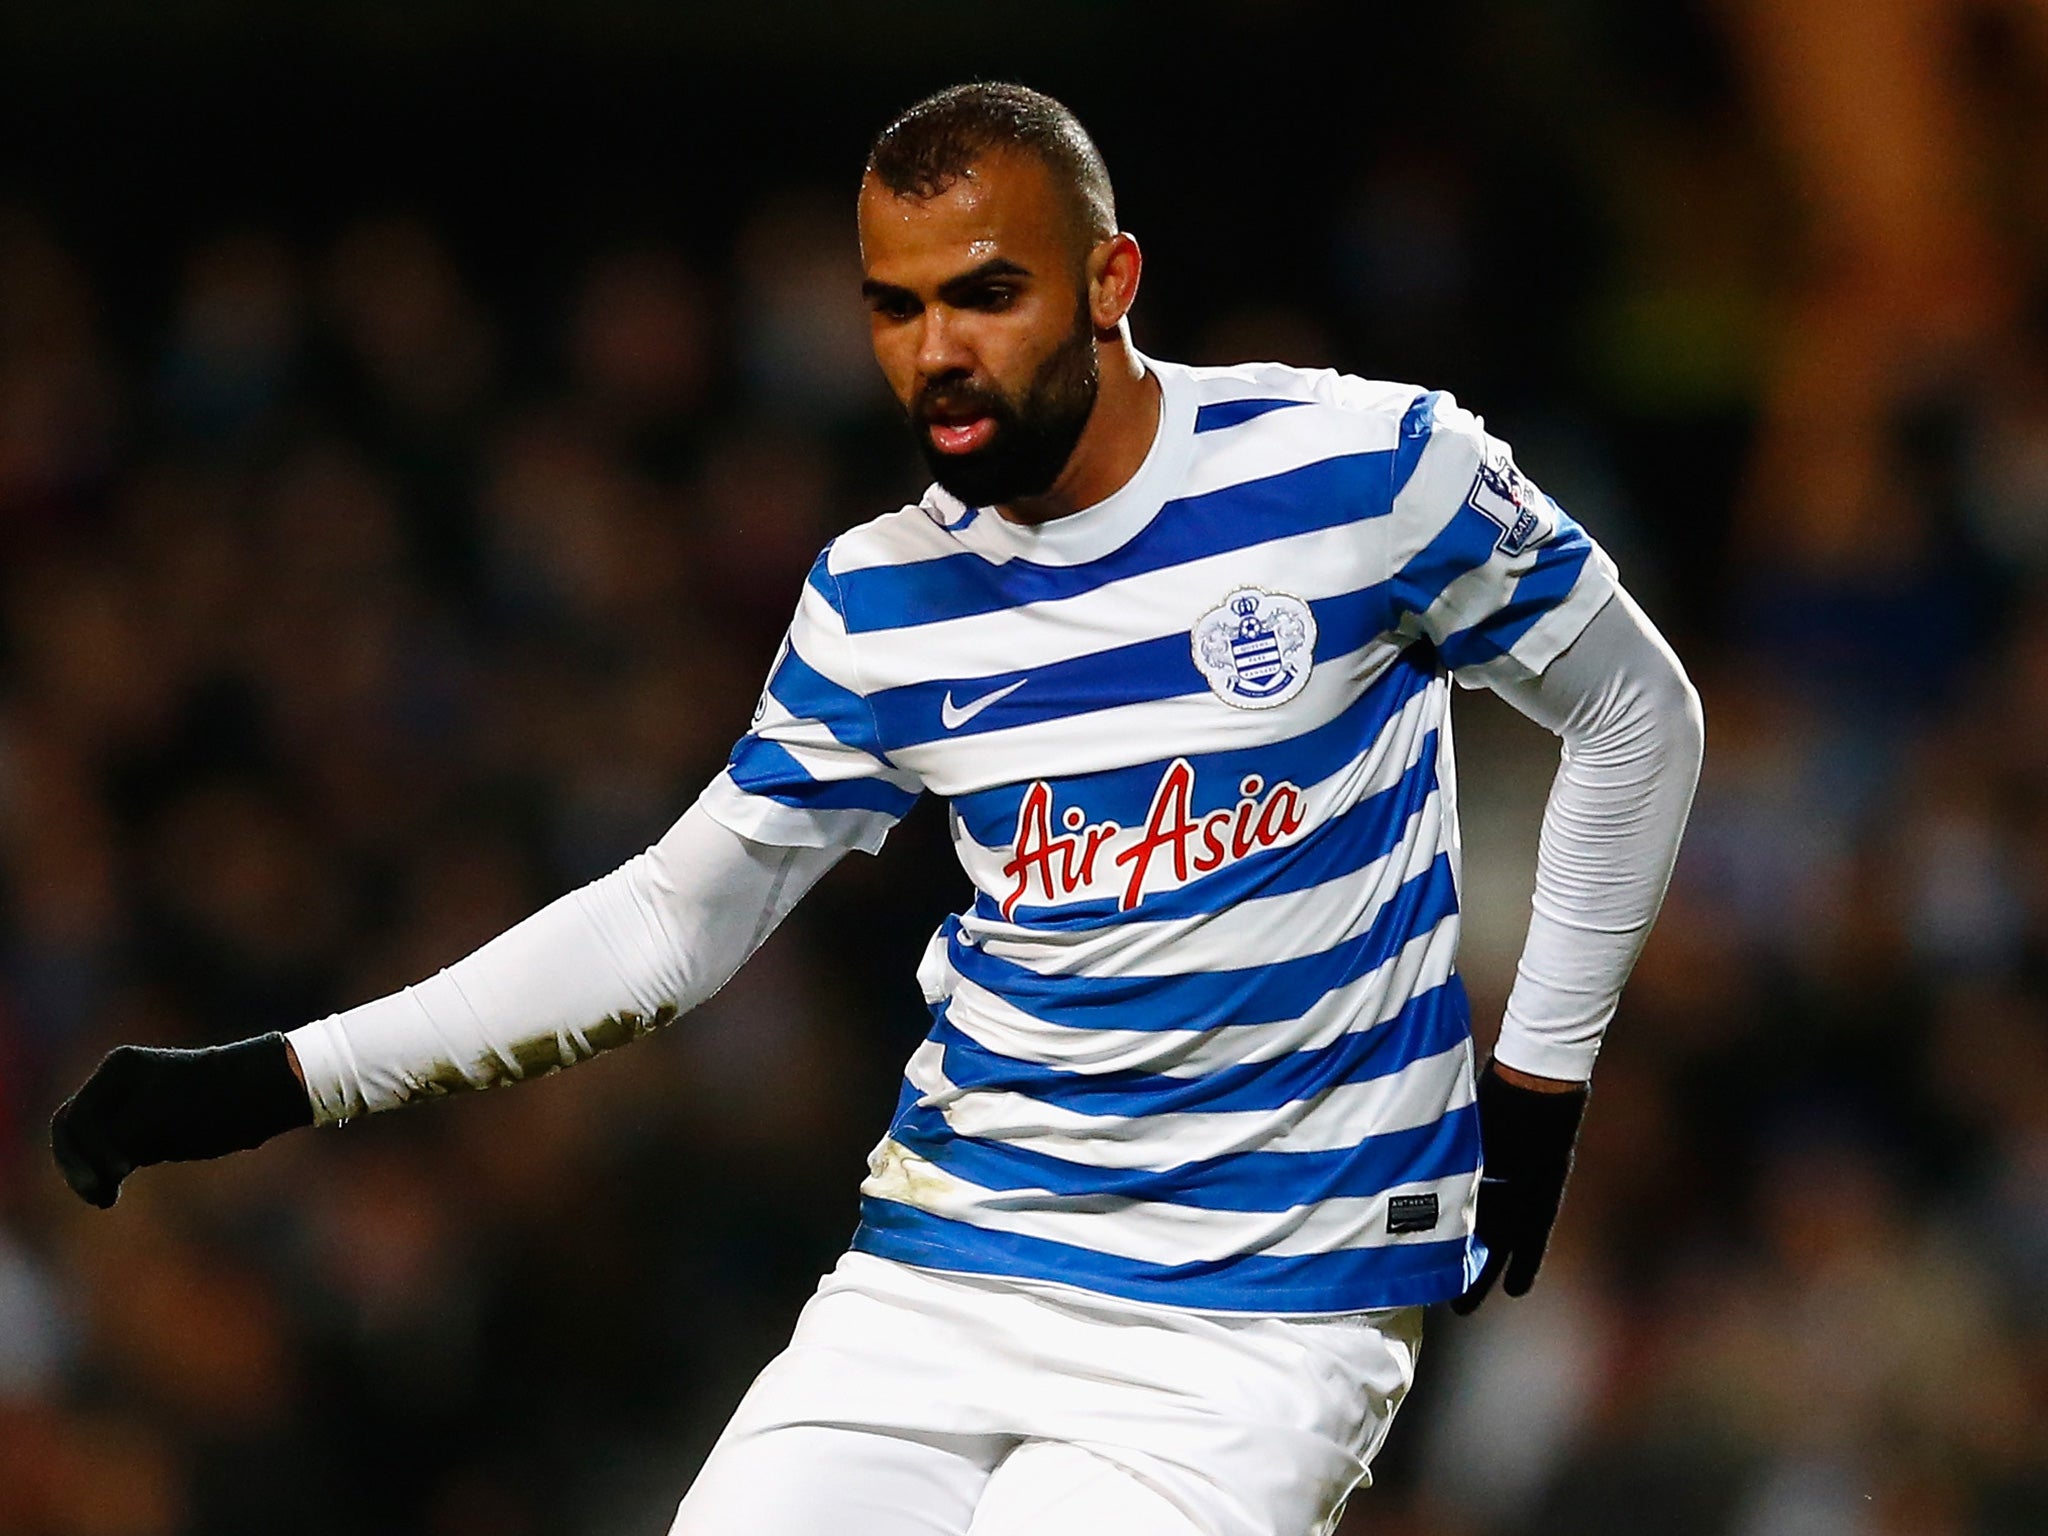 Sandro has missed the first six games of the new season after waiting for permission to return to the UK